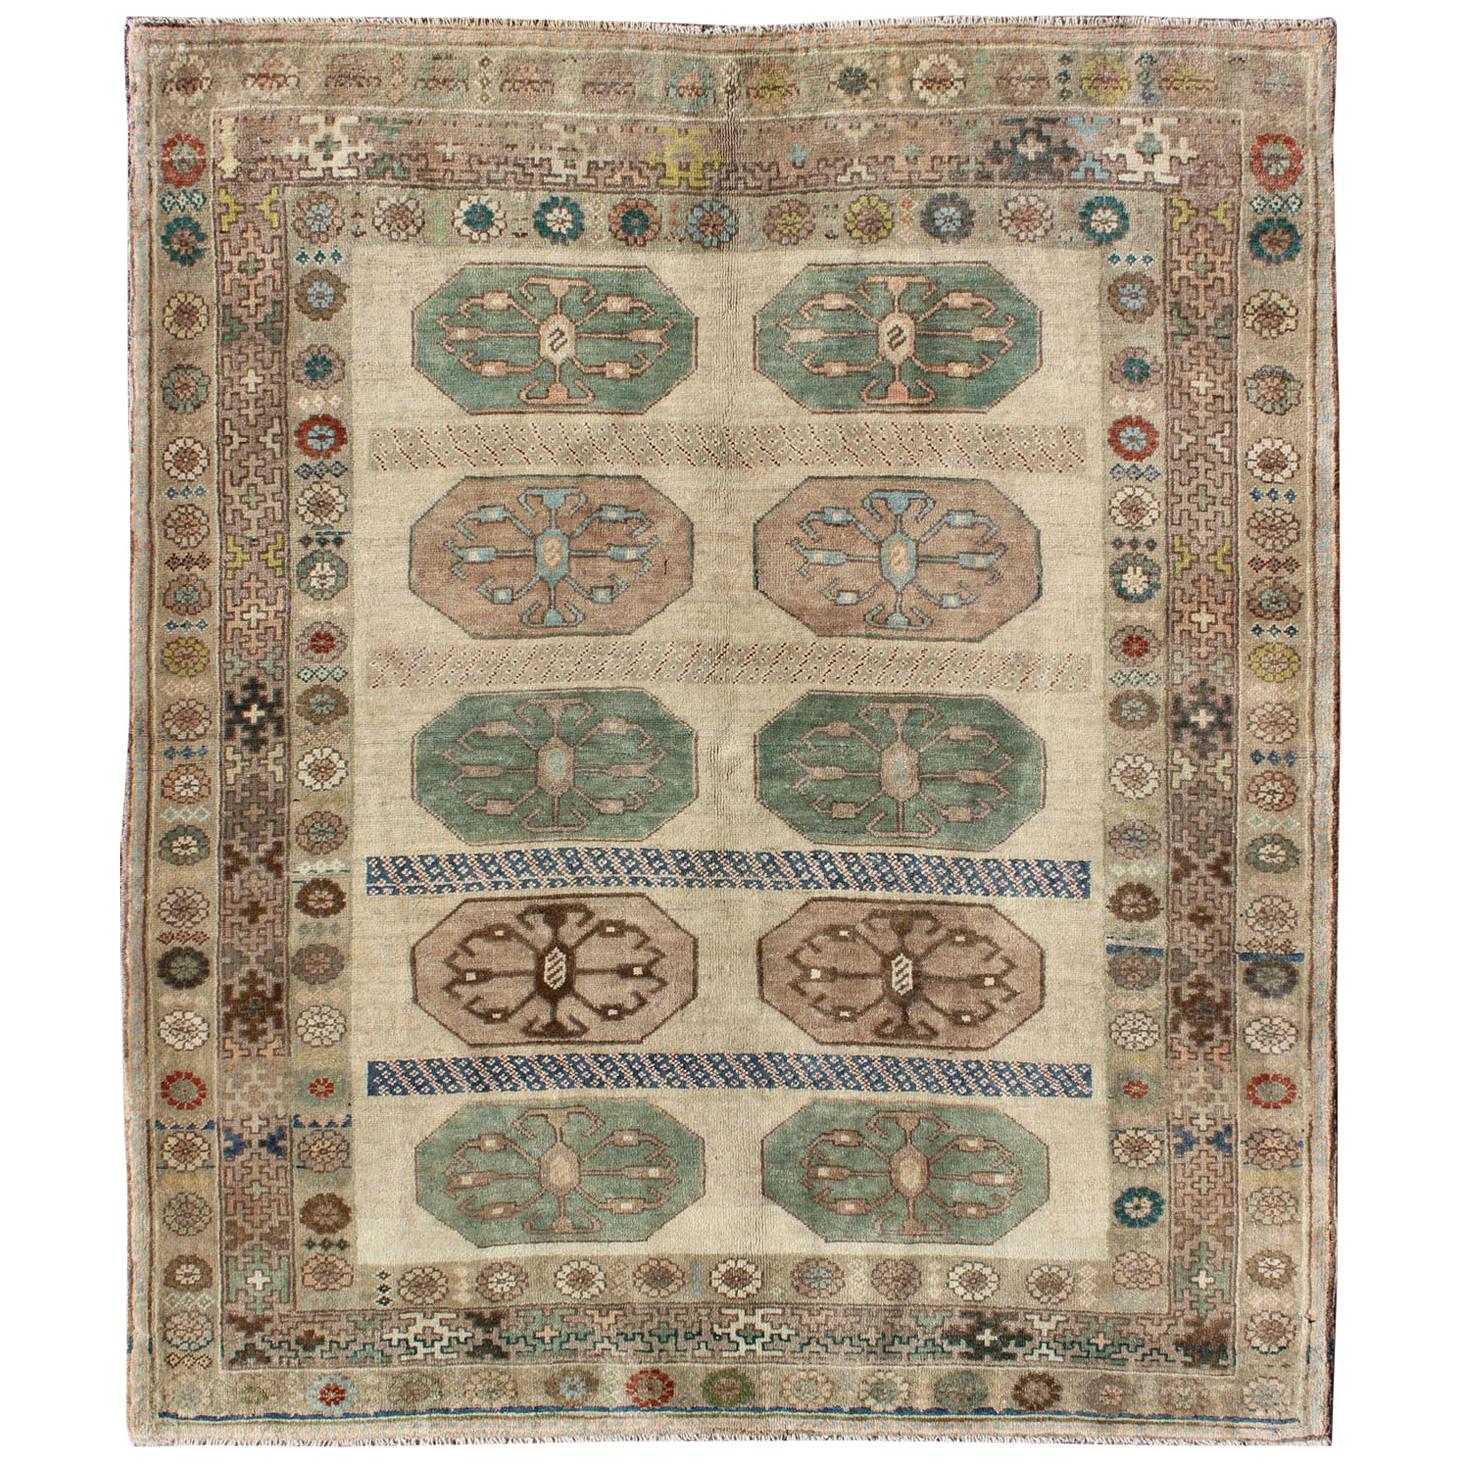 Midcentury Turkish Oushak Rug with Ten Geometric Medallions in Teal and Cream